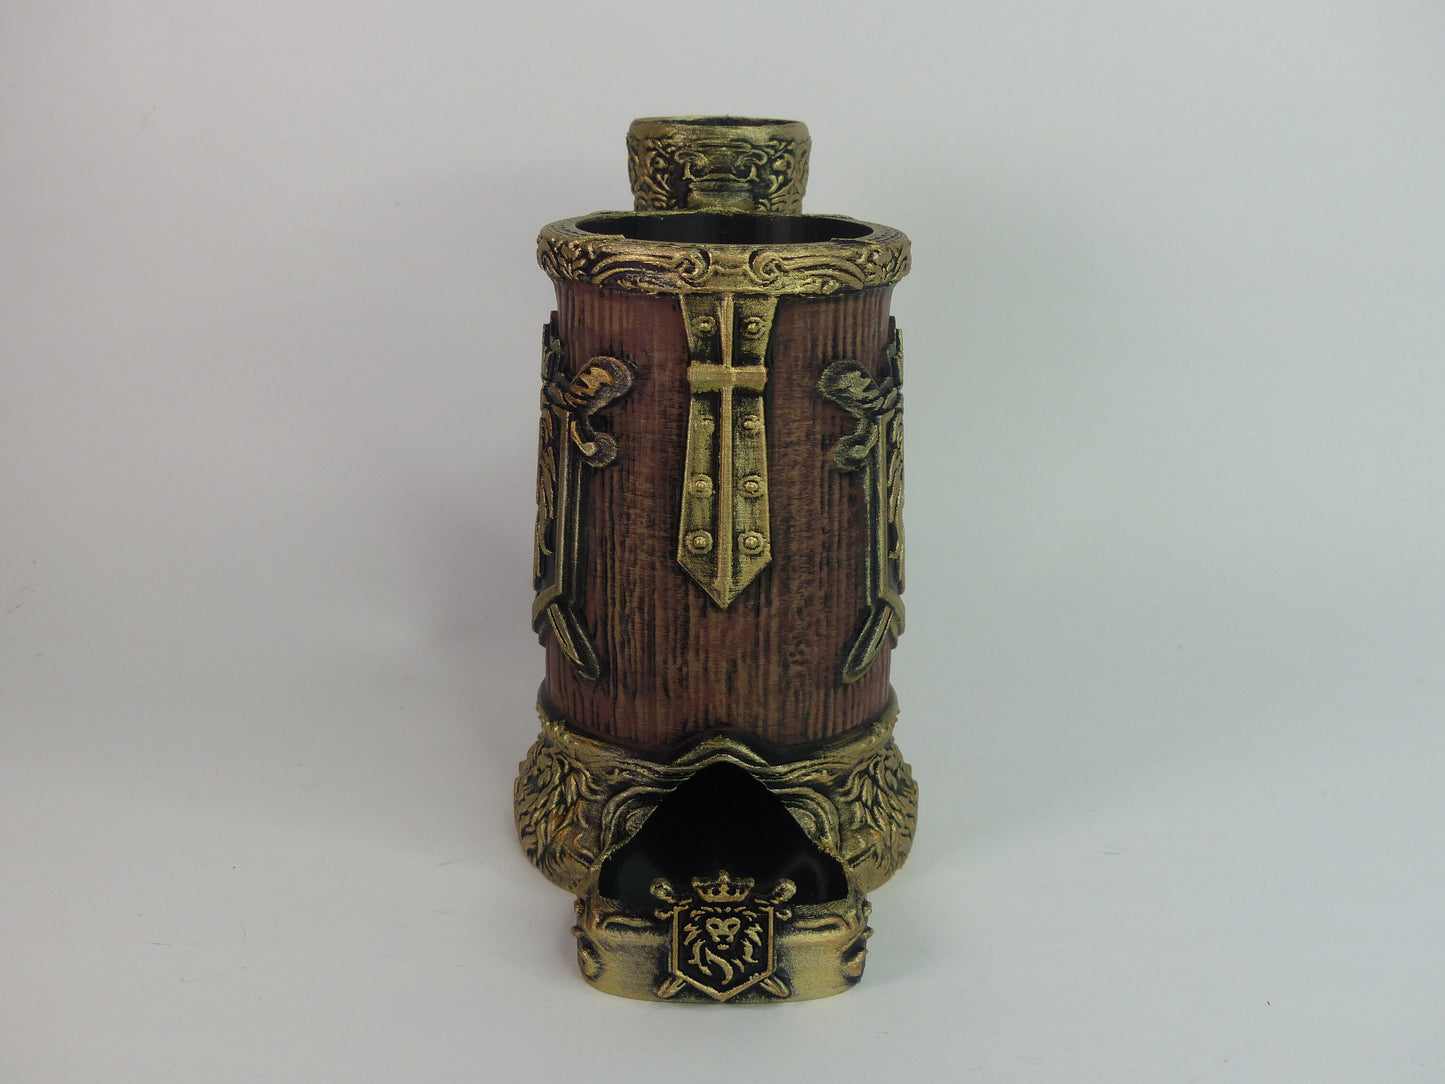 King Lion Crest Can Cosy/Cozy DnD Dice Tower - 3D printed and hand painted - Can be personalised!